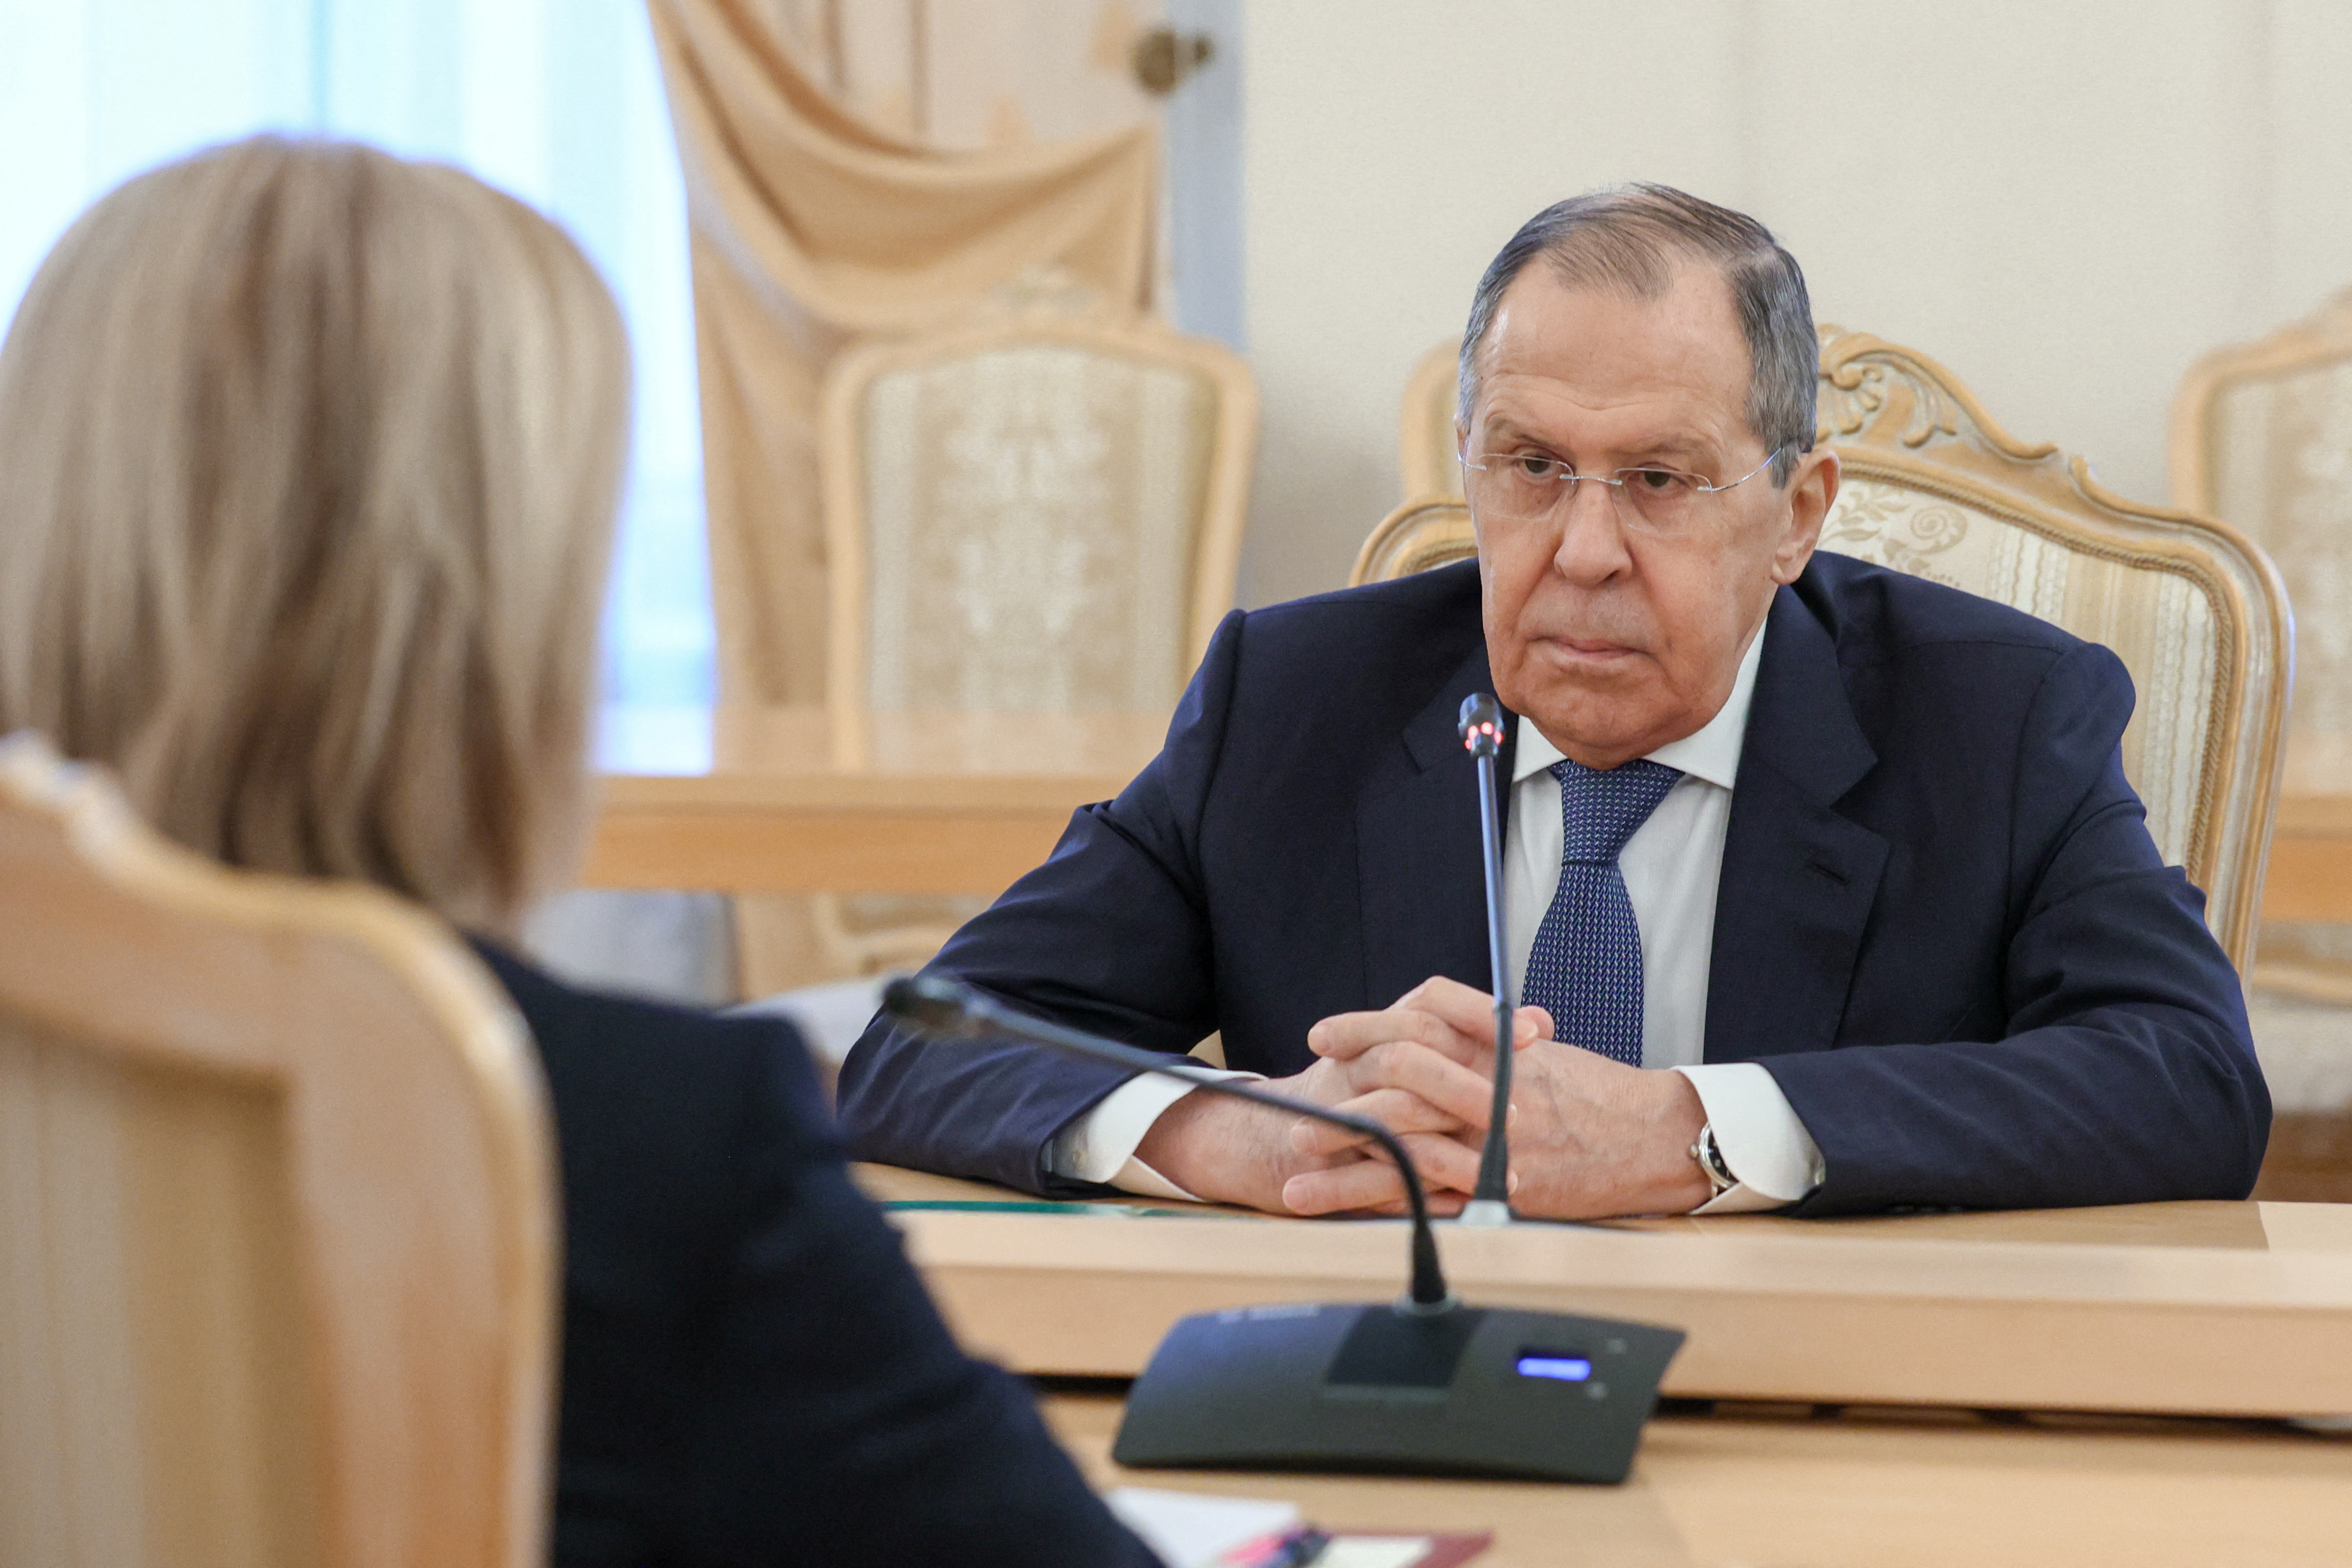 Russian Foreign Minister Sergei Lavrov meets with British Foreign Secretary Liz Truss in Moscow